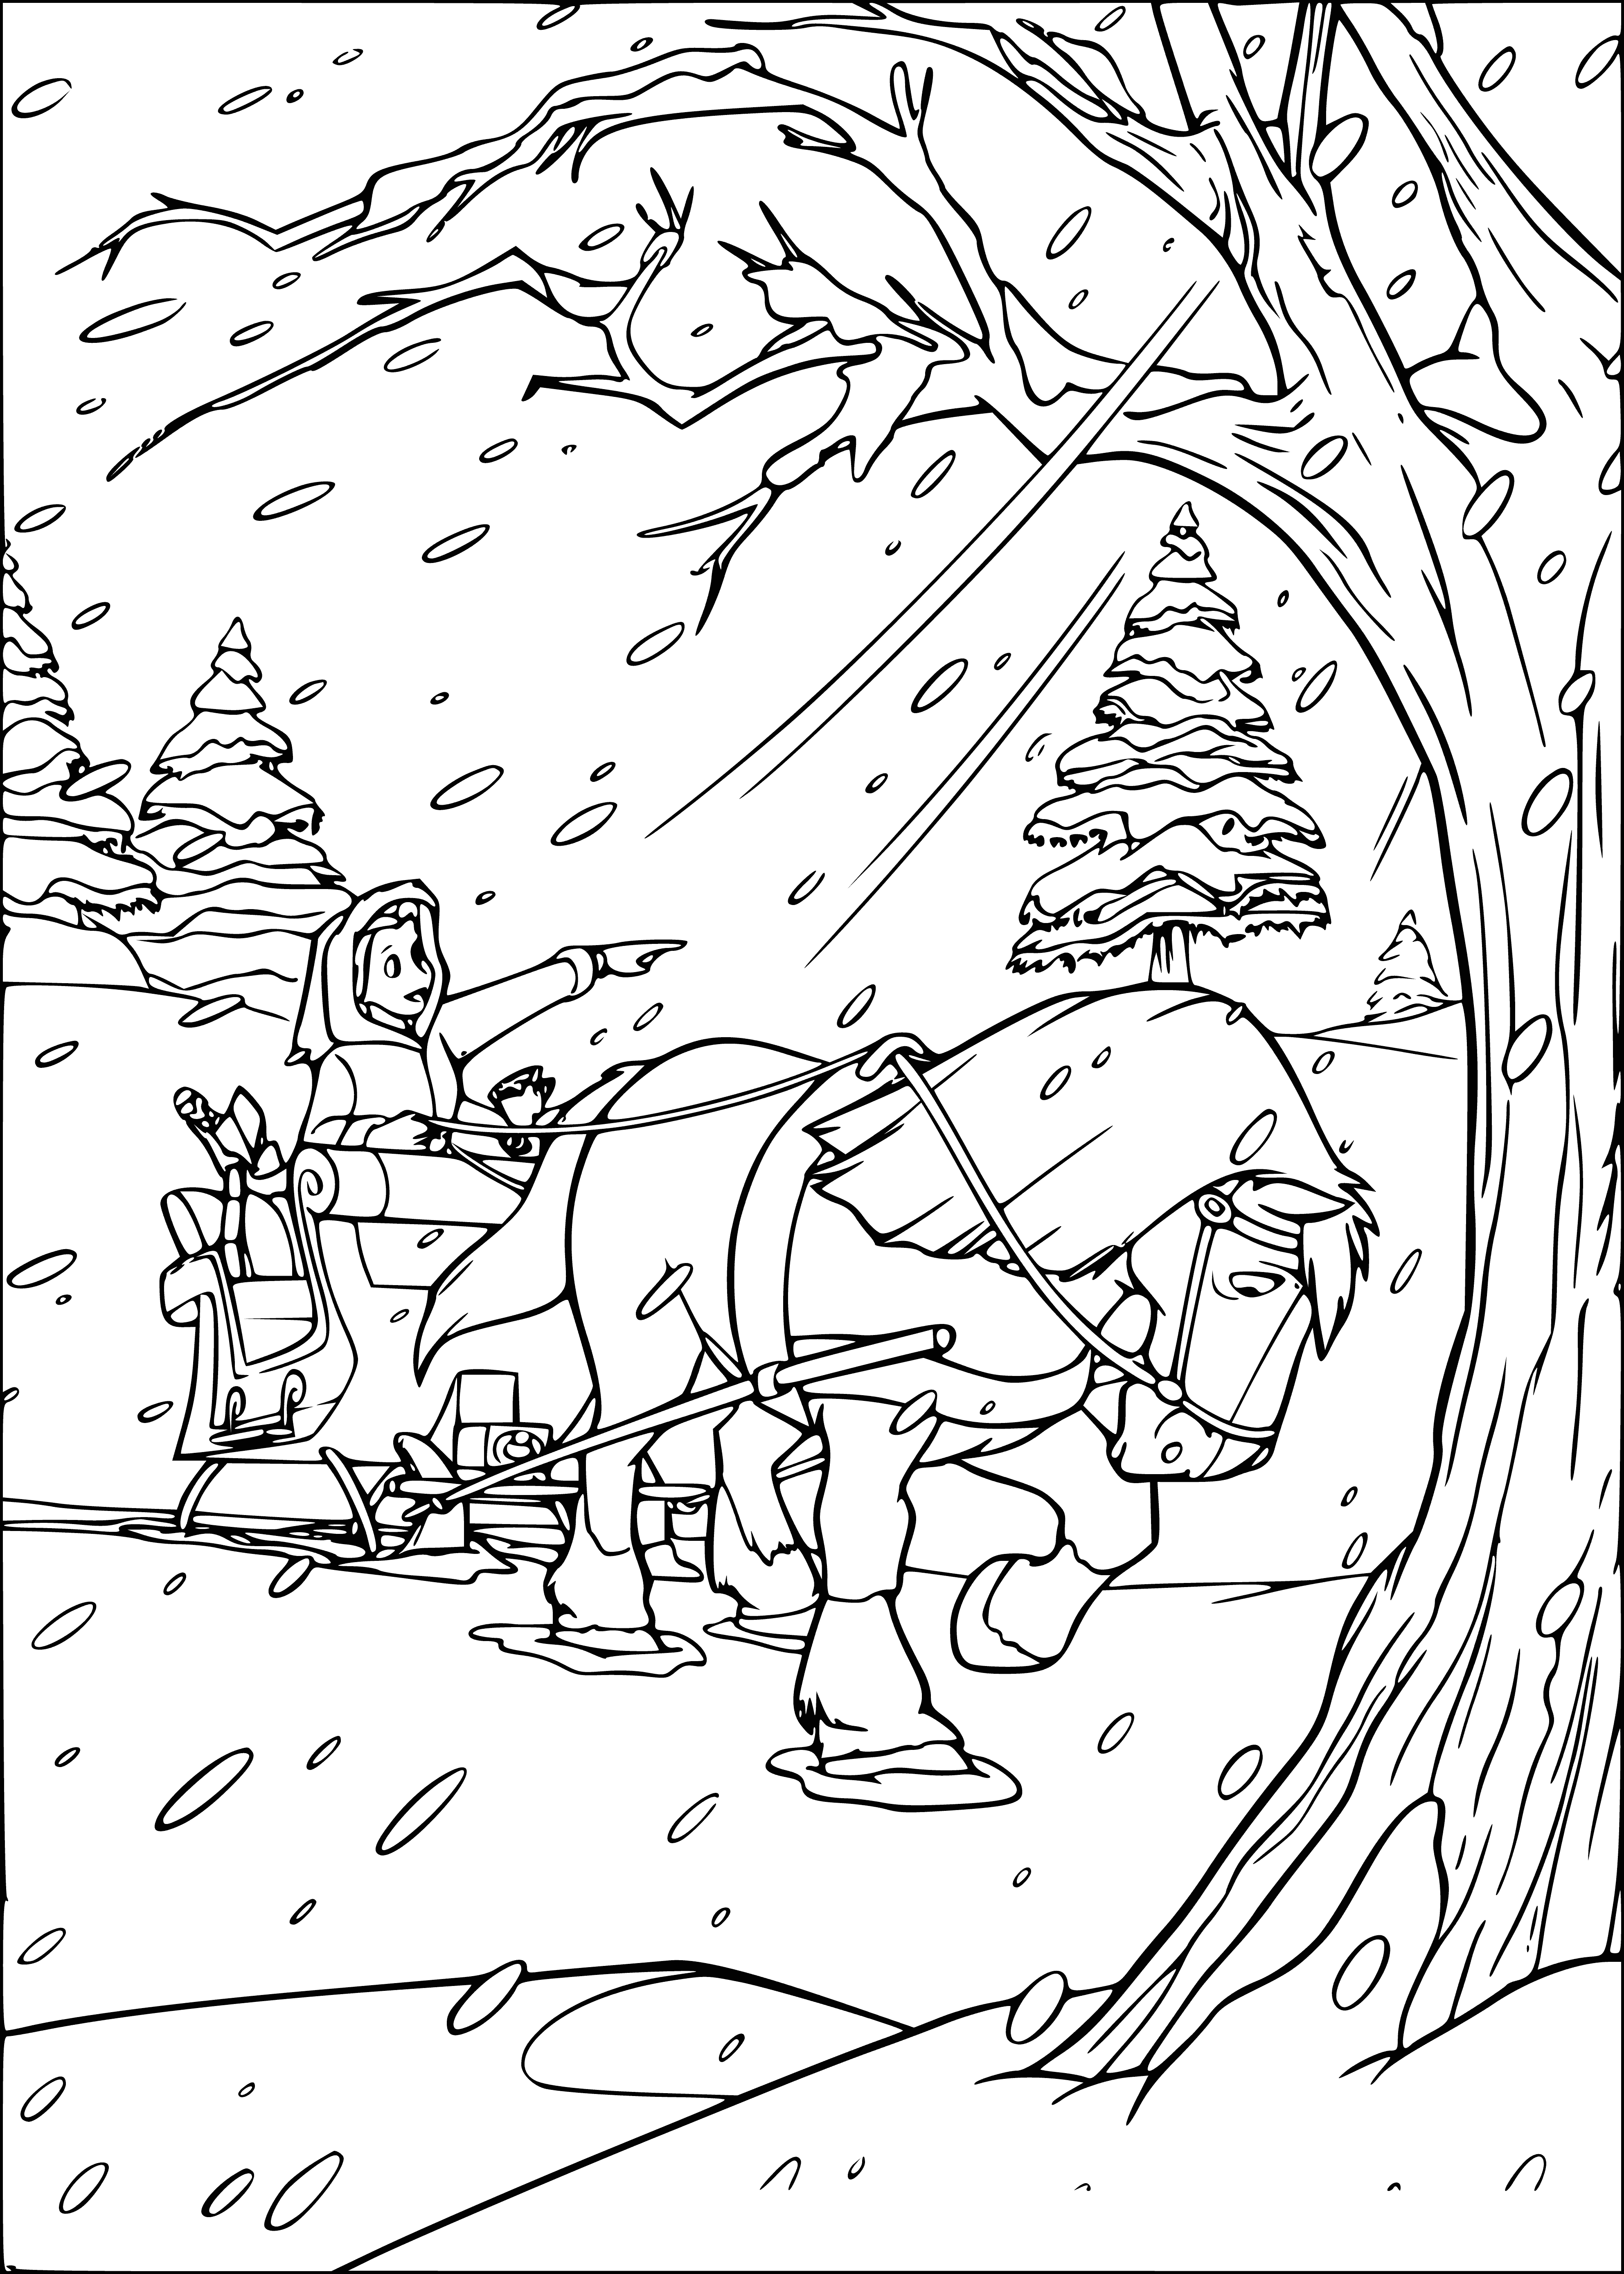 Behind the Christmas tree coloring page